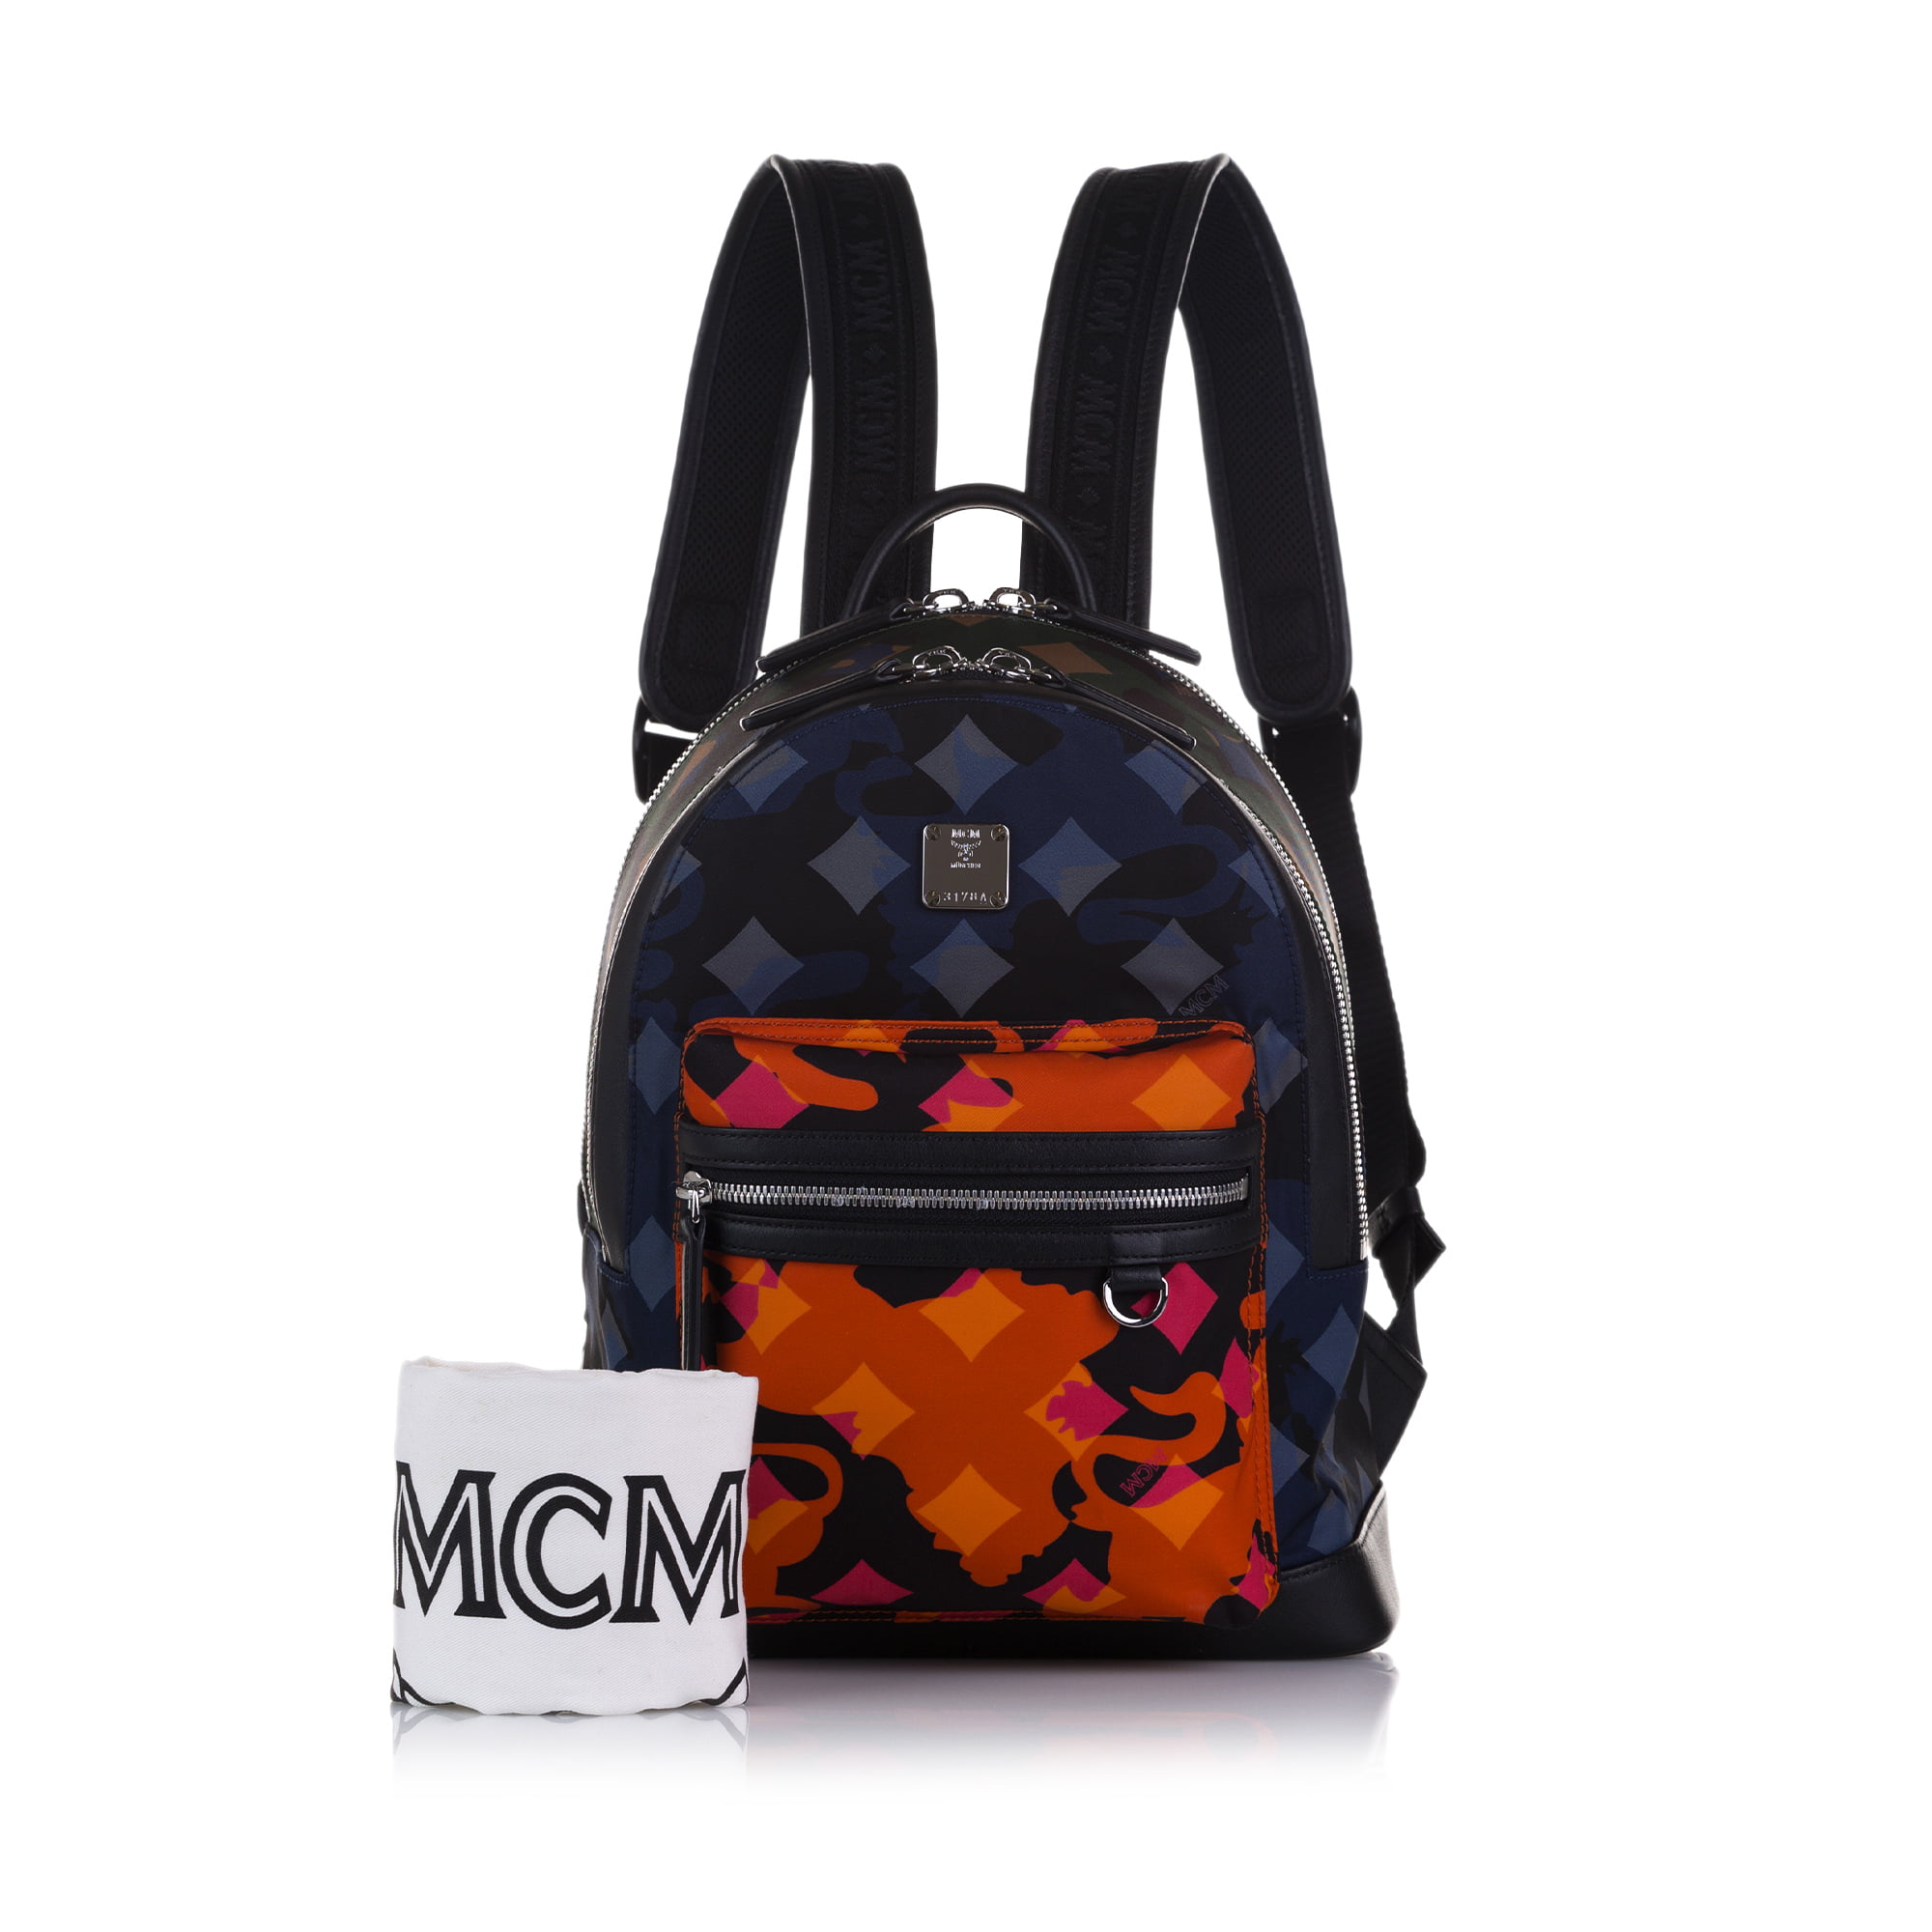 Unisex Pre-Owned Authenticated MCM Camo Dieter Munich Lion